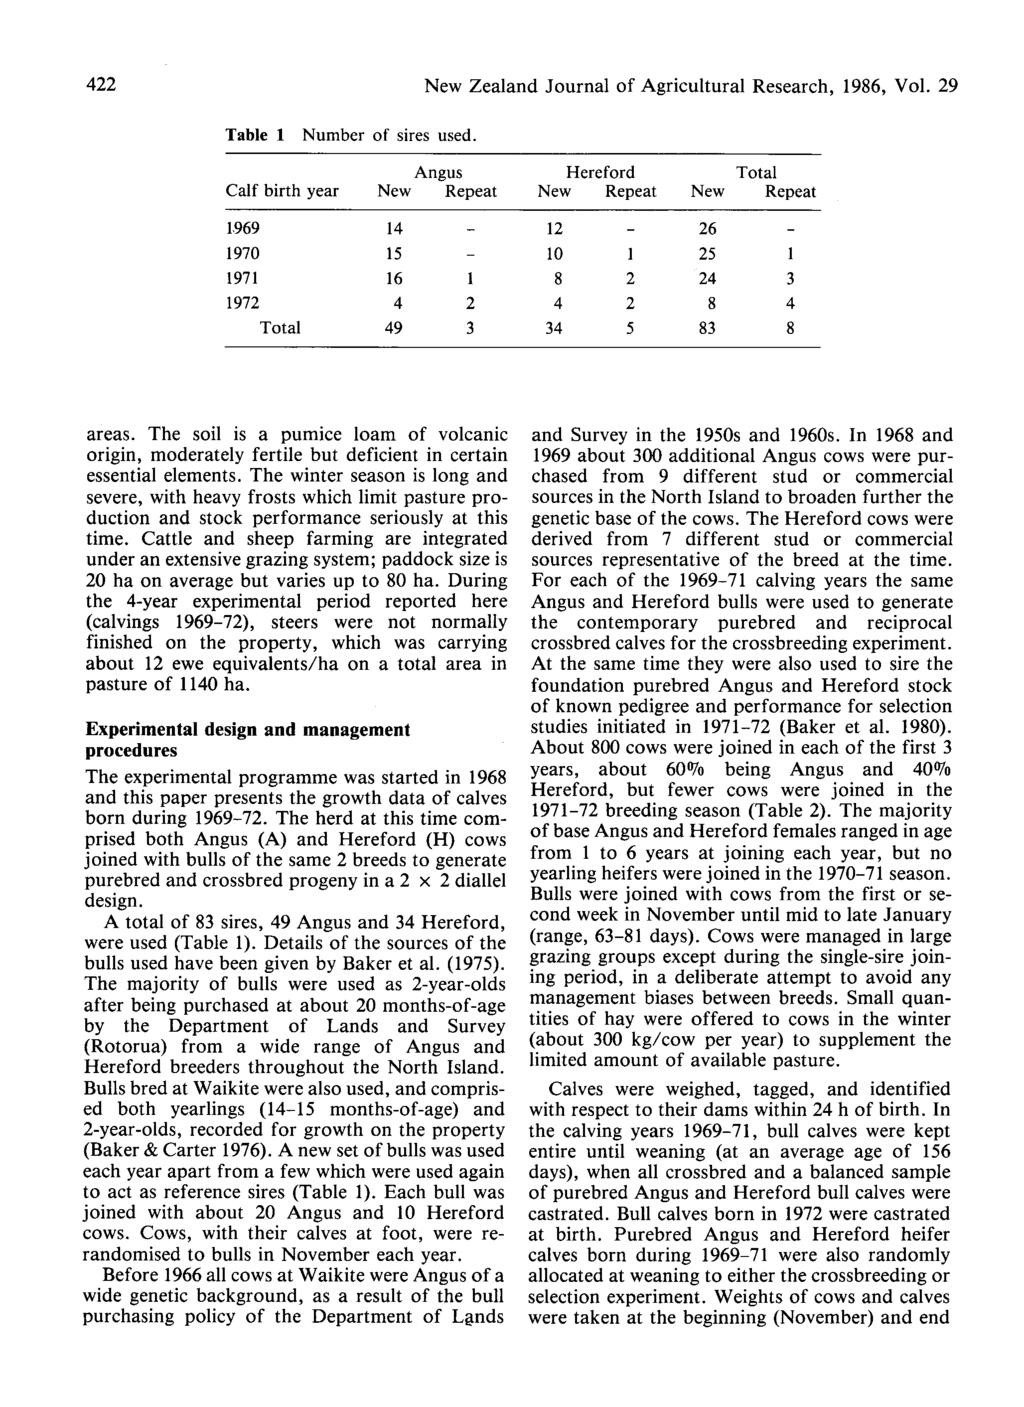 422 New Zealand Journal of Agricultural Research, 1986, Vol. 29 Table 1 Number of sires used.